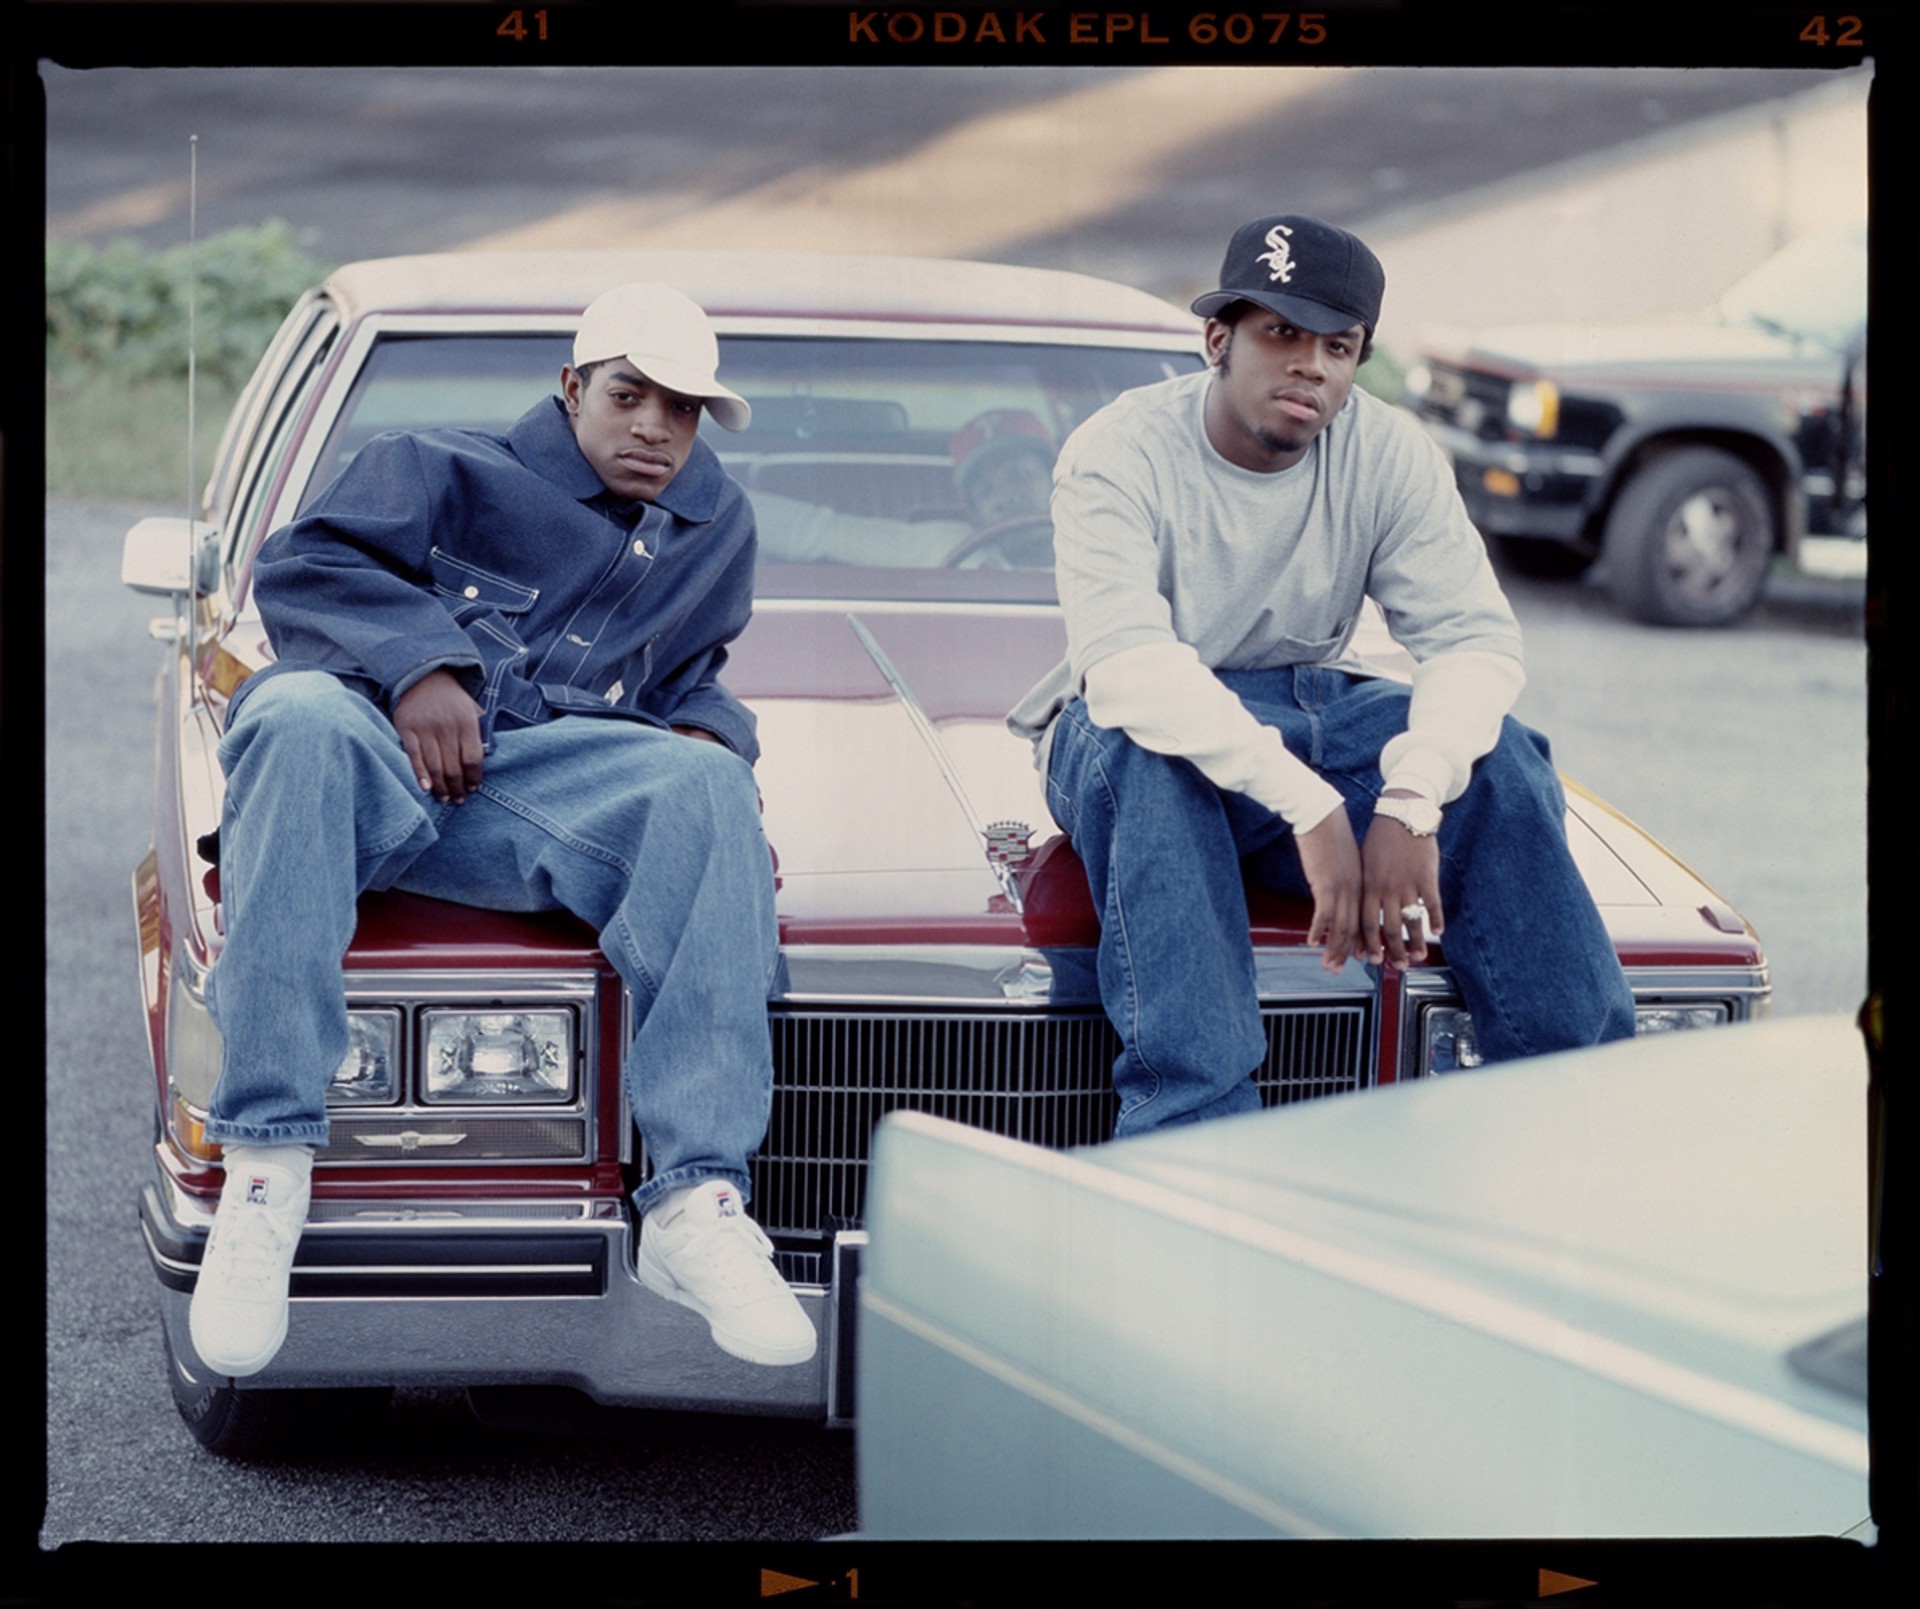 93125 Outkast On the Cadillac F16 color by Timothy White